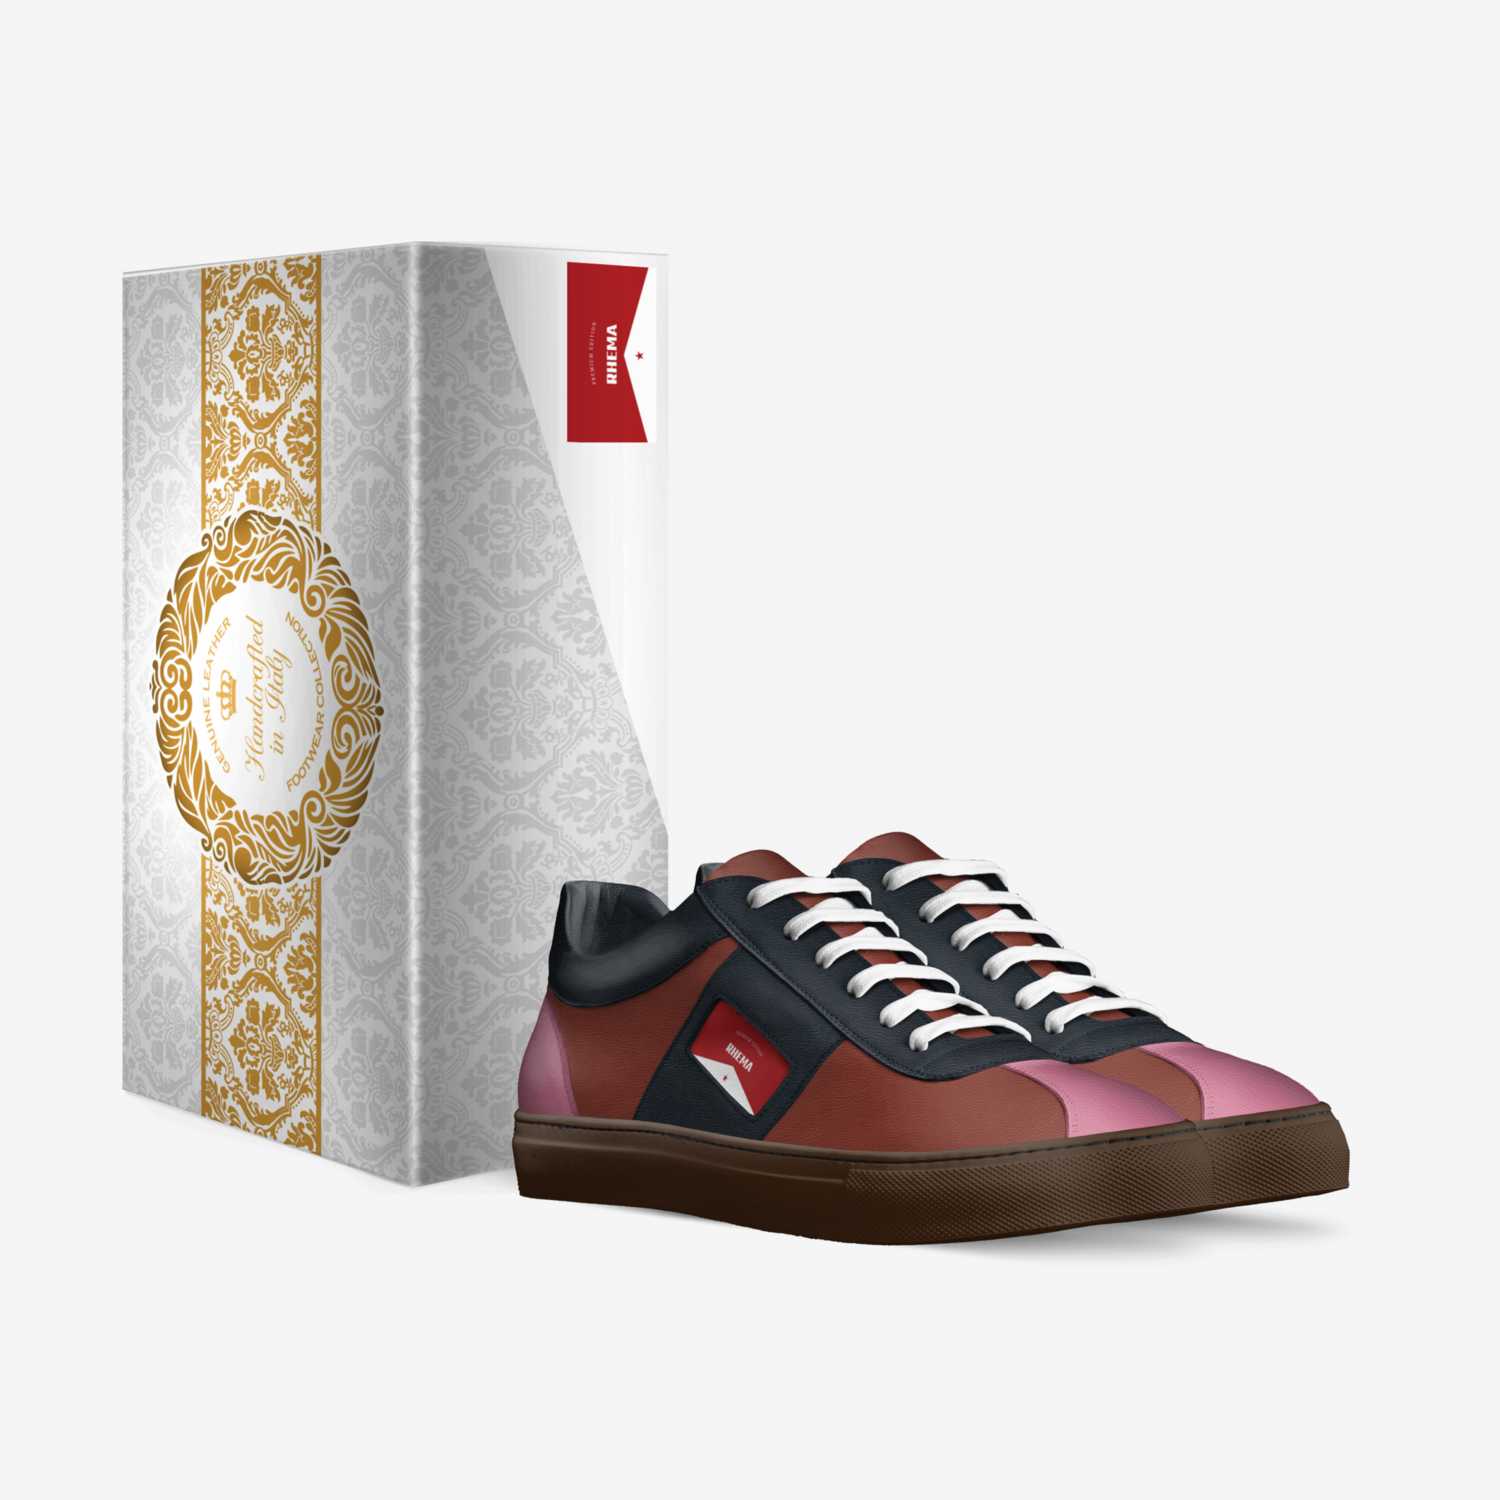 RHEMA custom made in Italy shoes by Jay Hayes | Box view